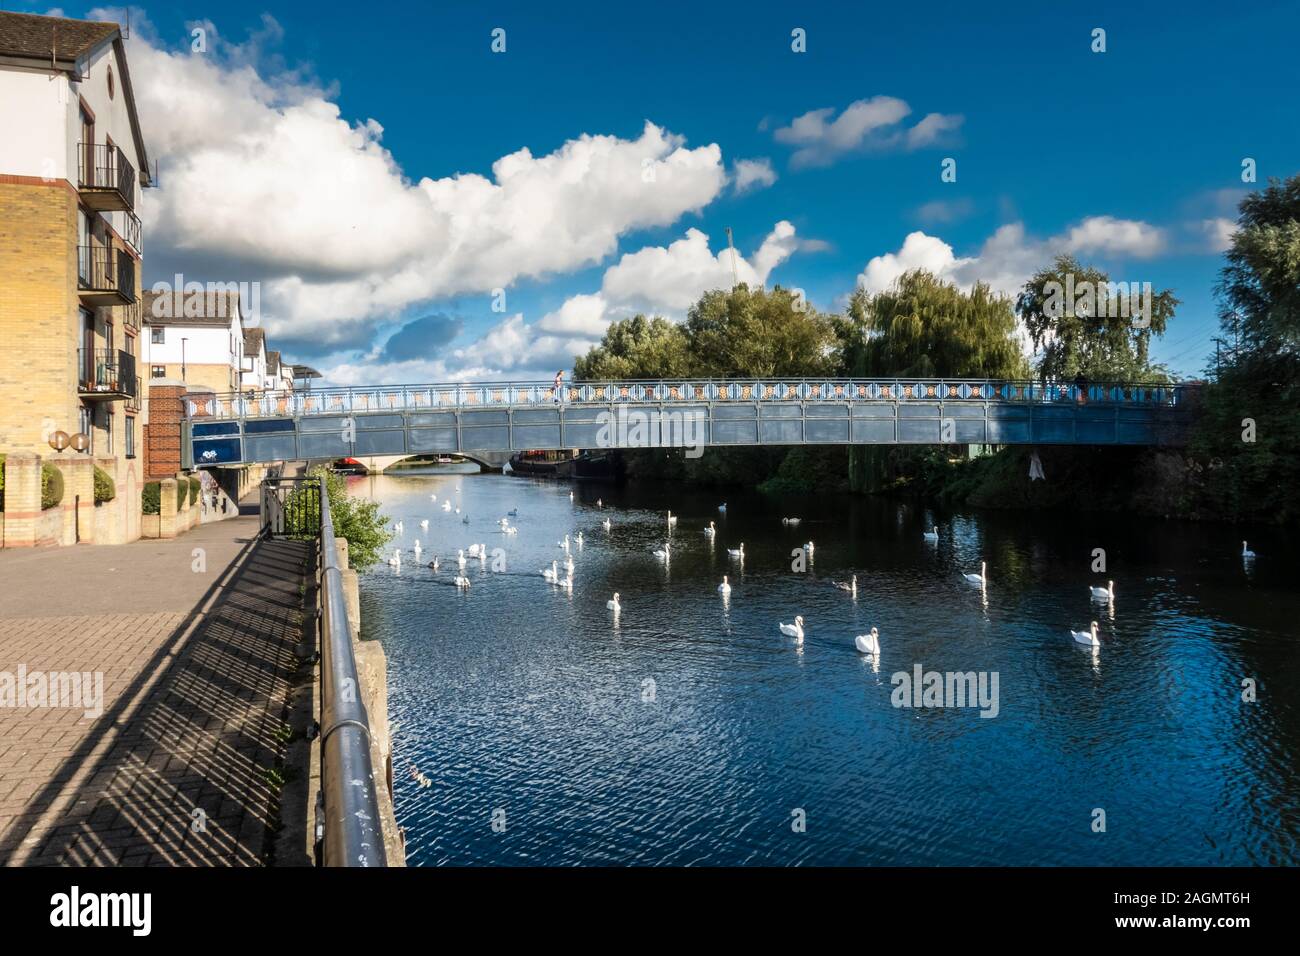 The River Nene in central Peterborough, Cambridgeshire, England, UK, on a sunny September day with numerous swans in the water Stock Photo